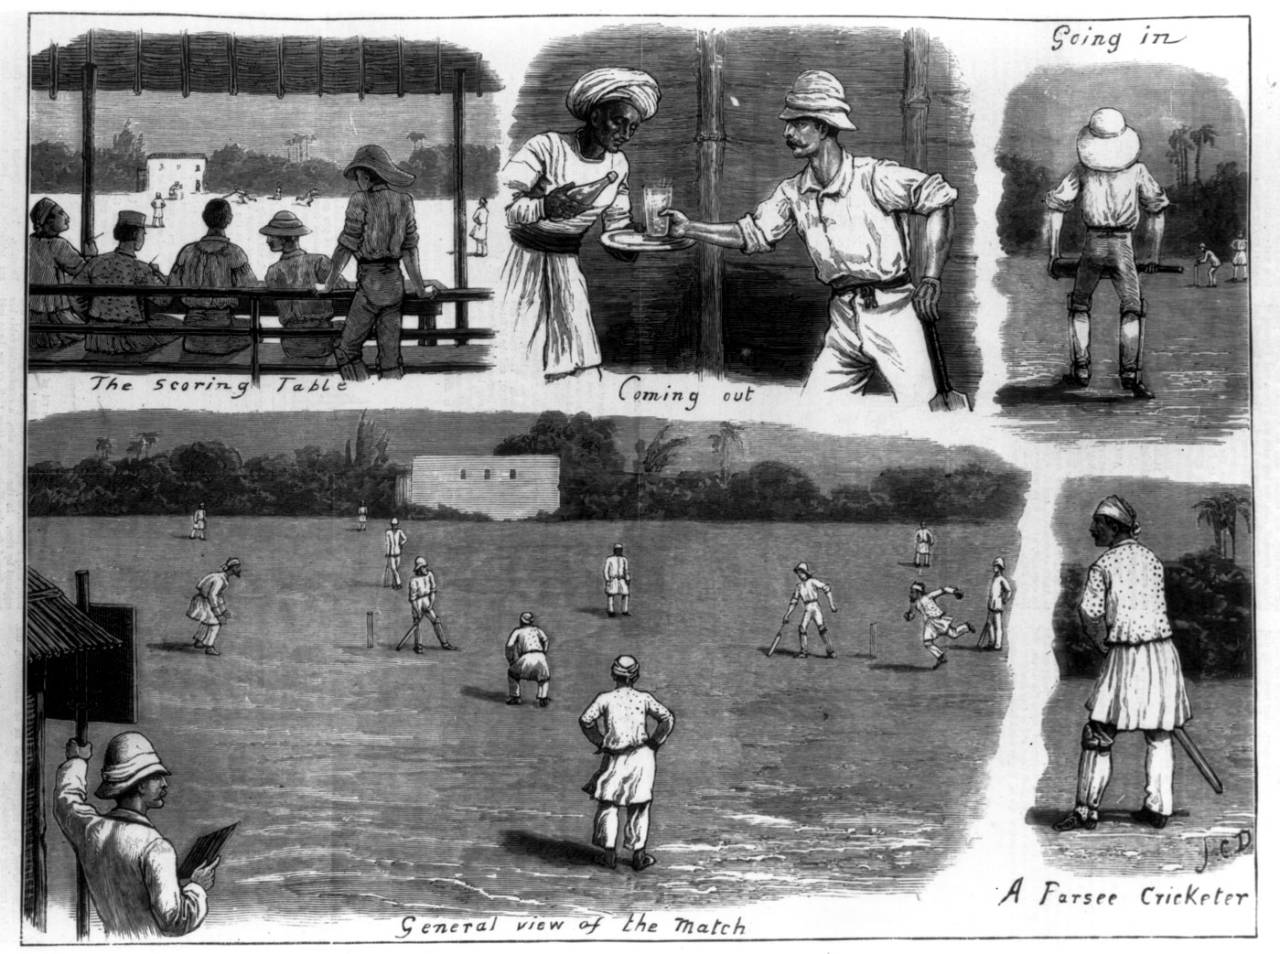 An illustration of cricket in India in the 19th century, 1878